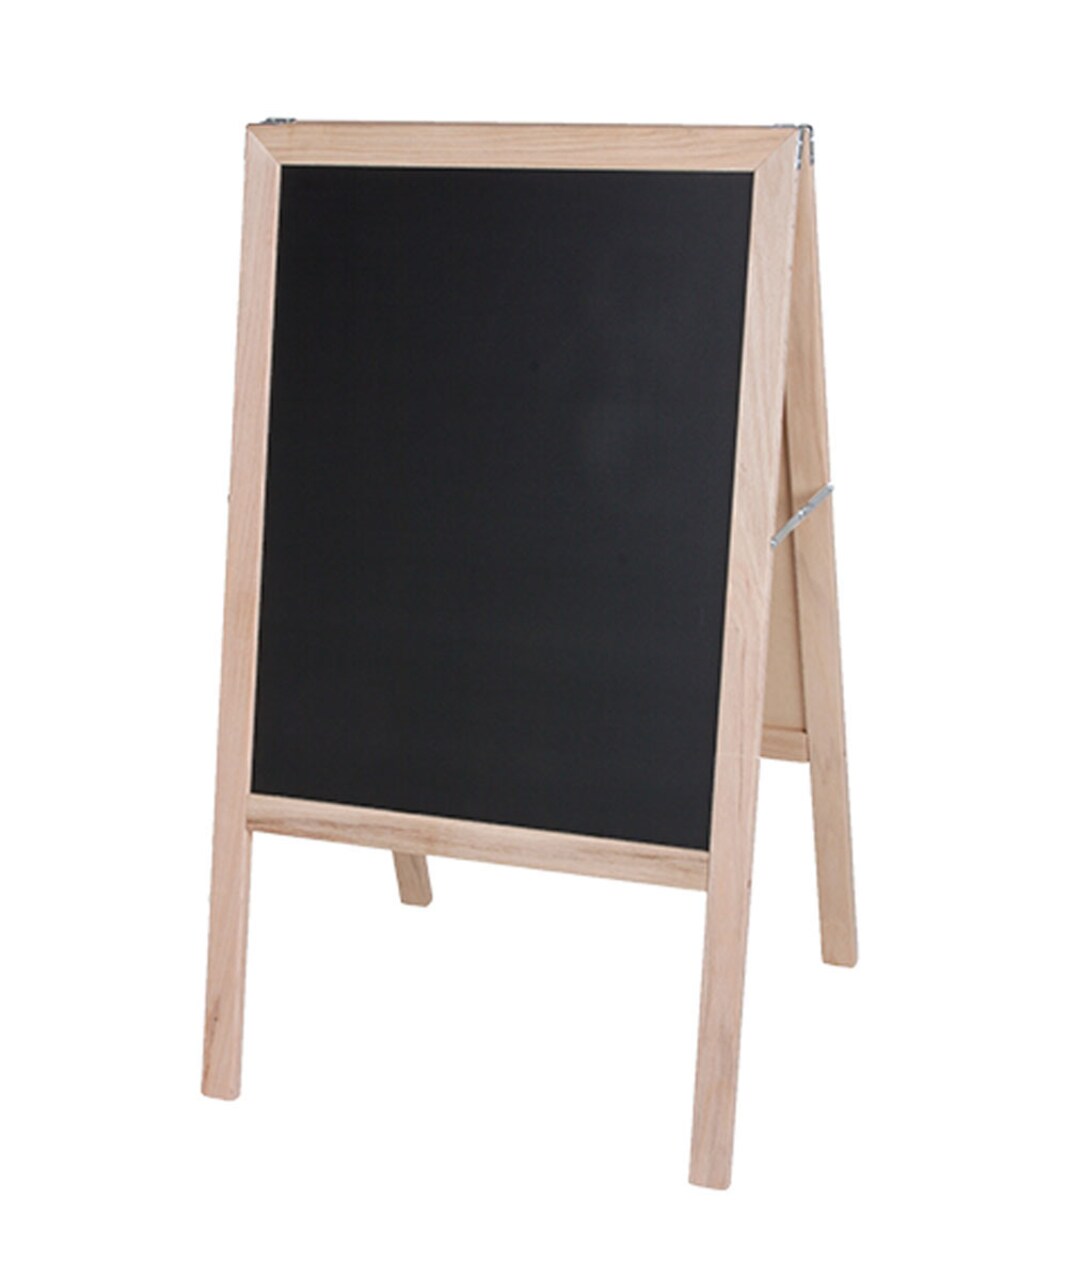 Marquee Easel Black Dry-Erase Board